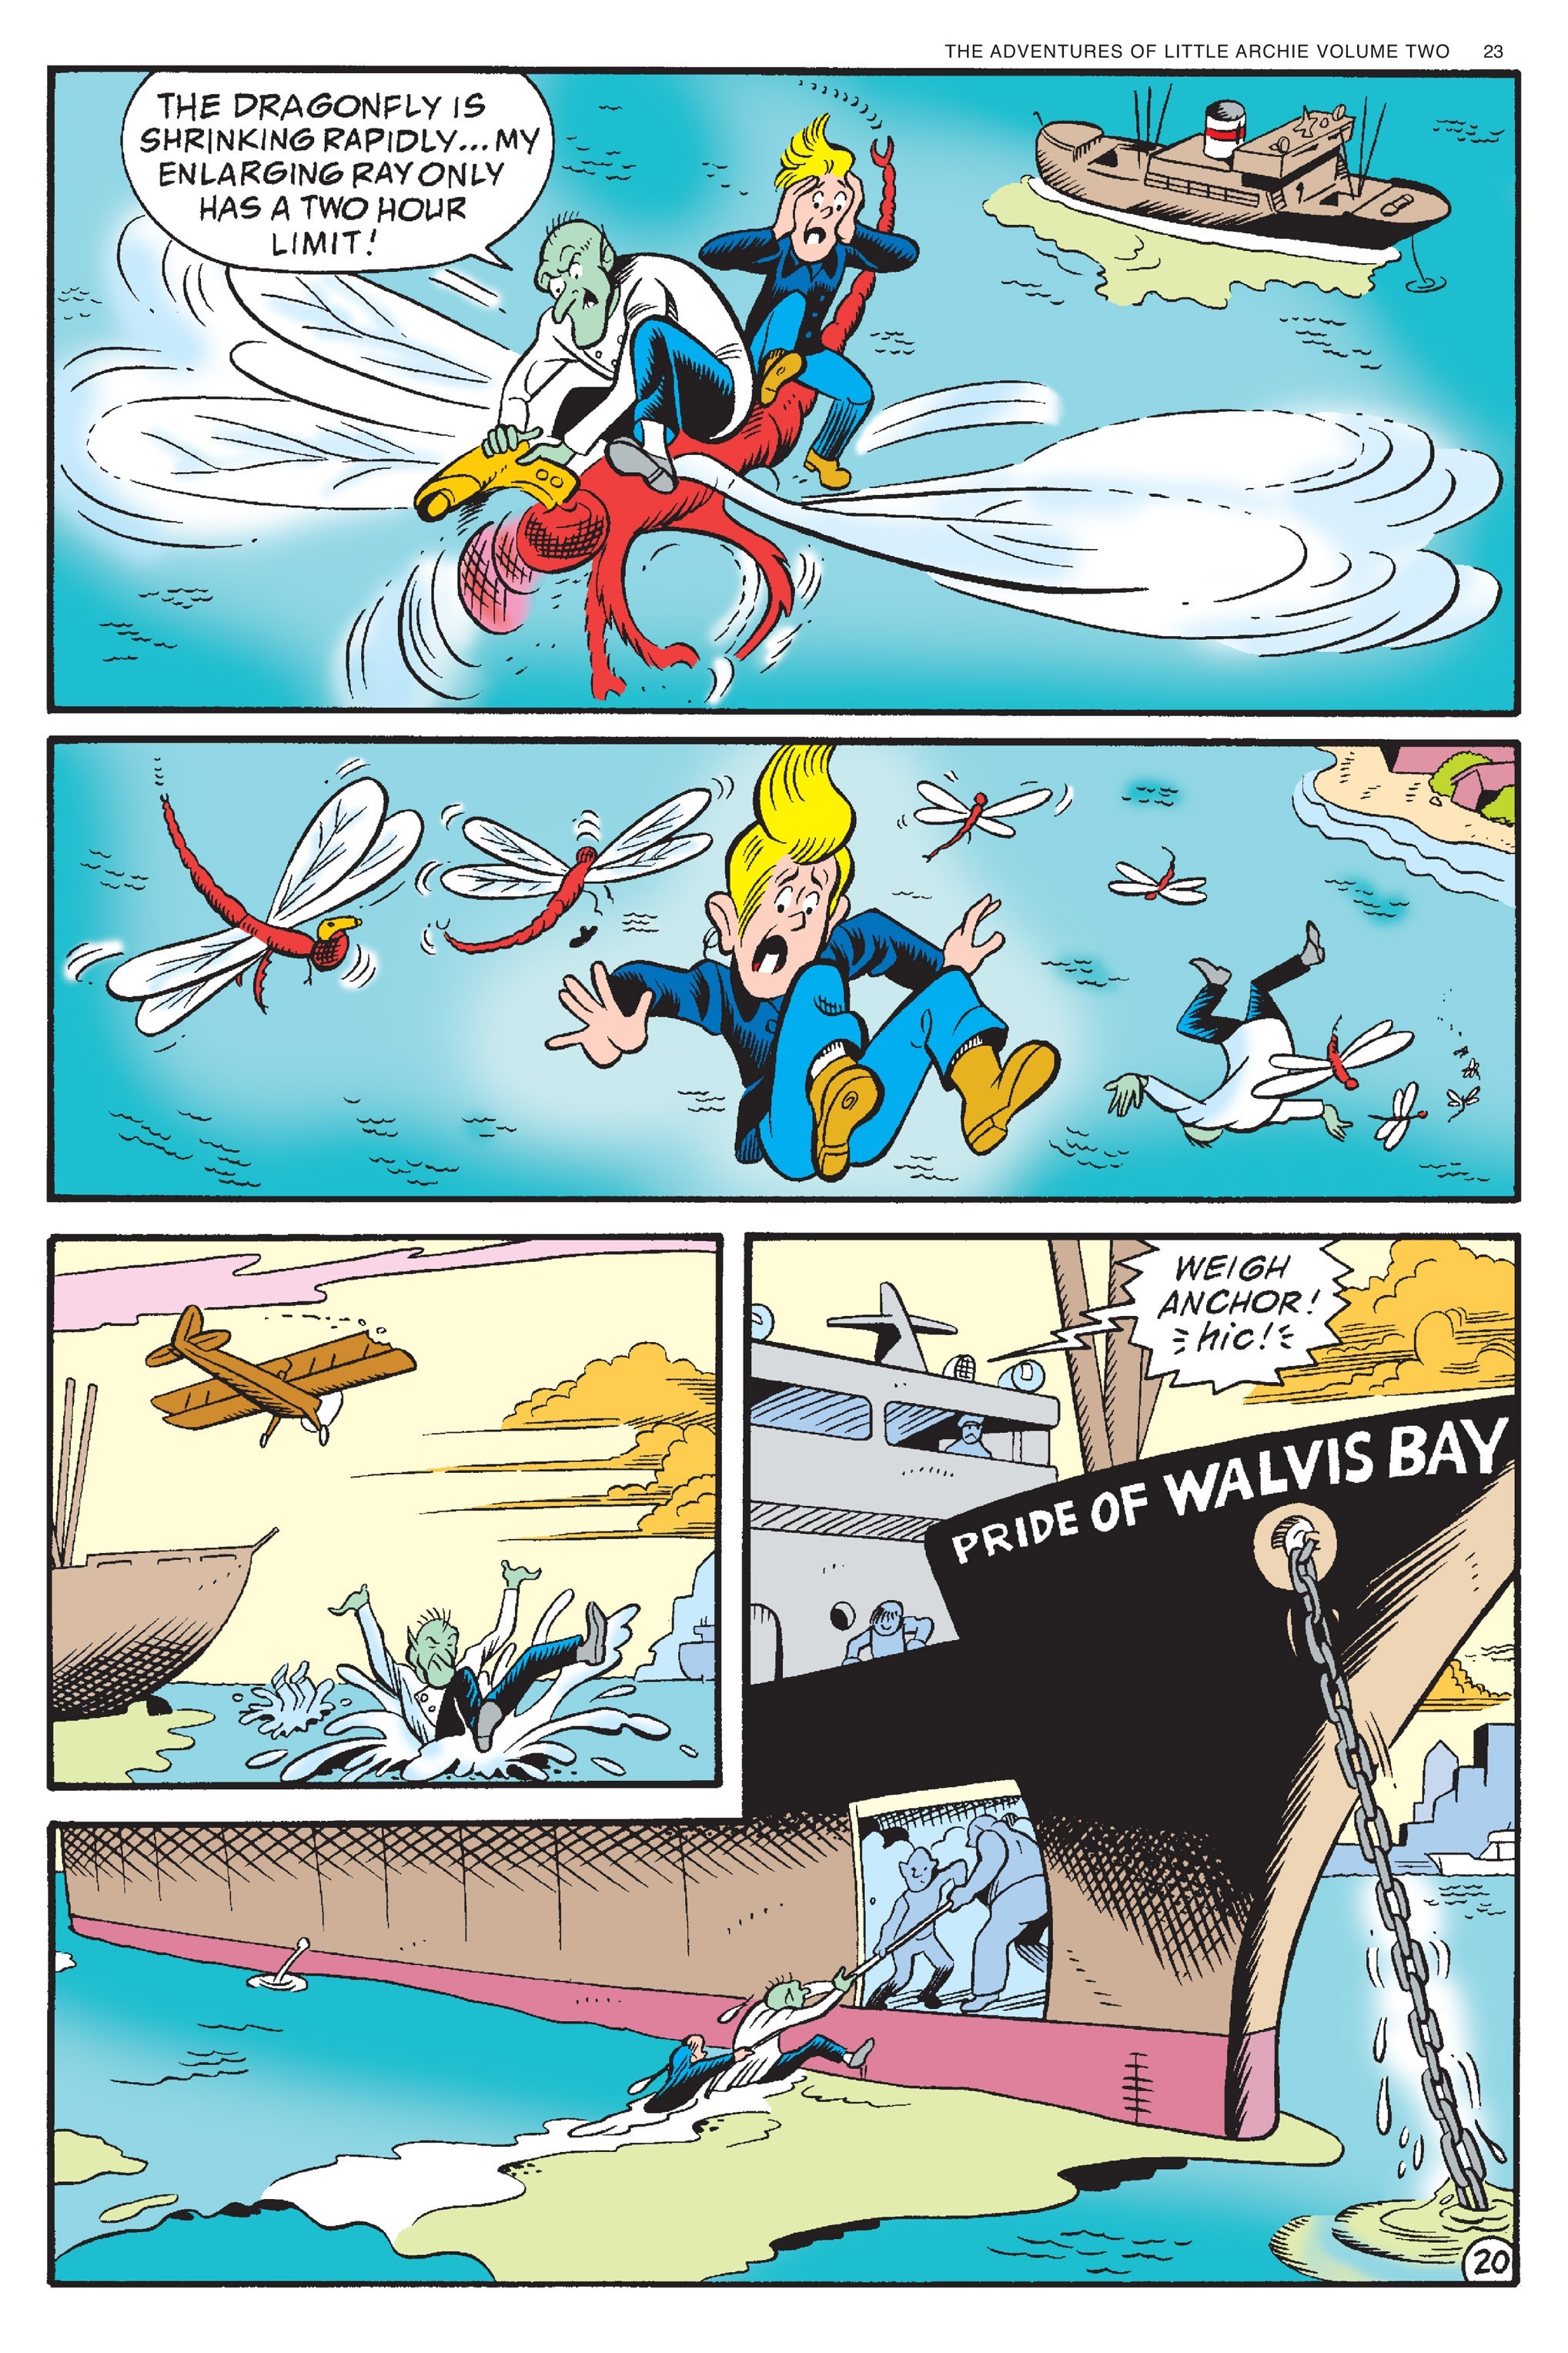 Read online Adventures of Little Archie comic -  Issue # TPB 2 - 24